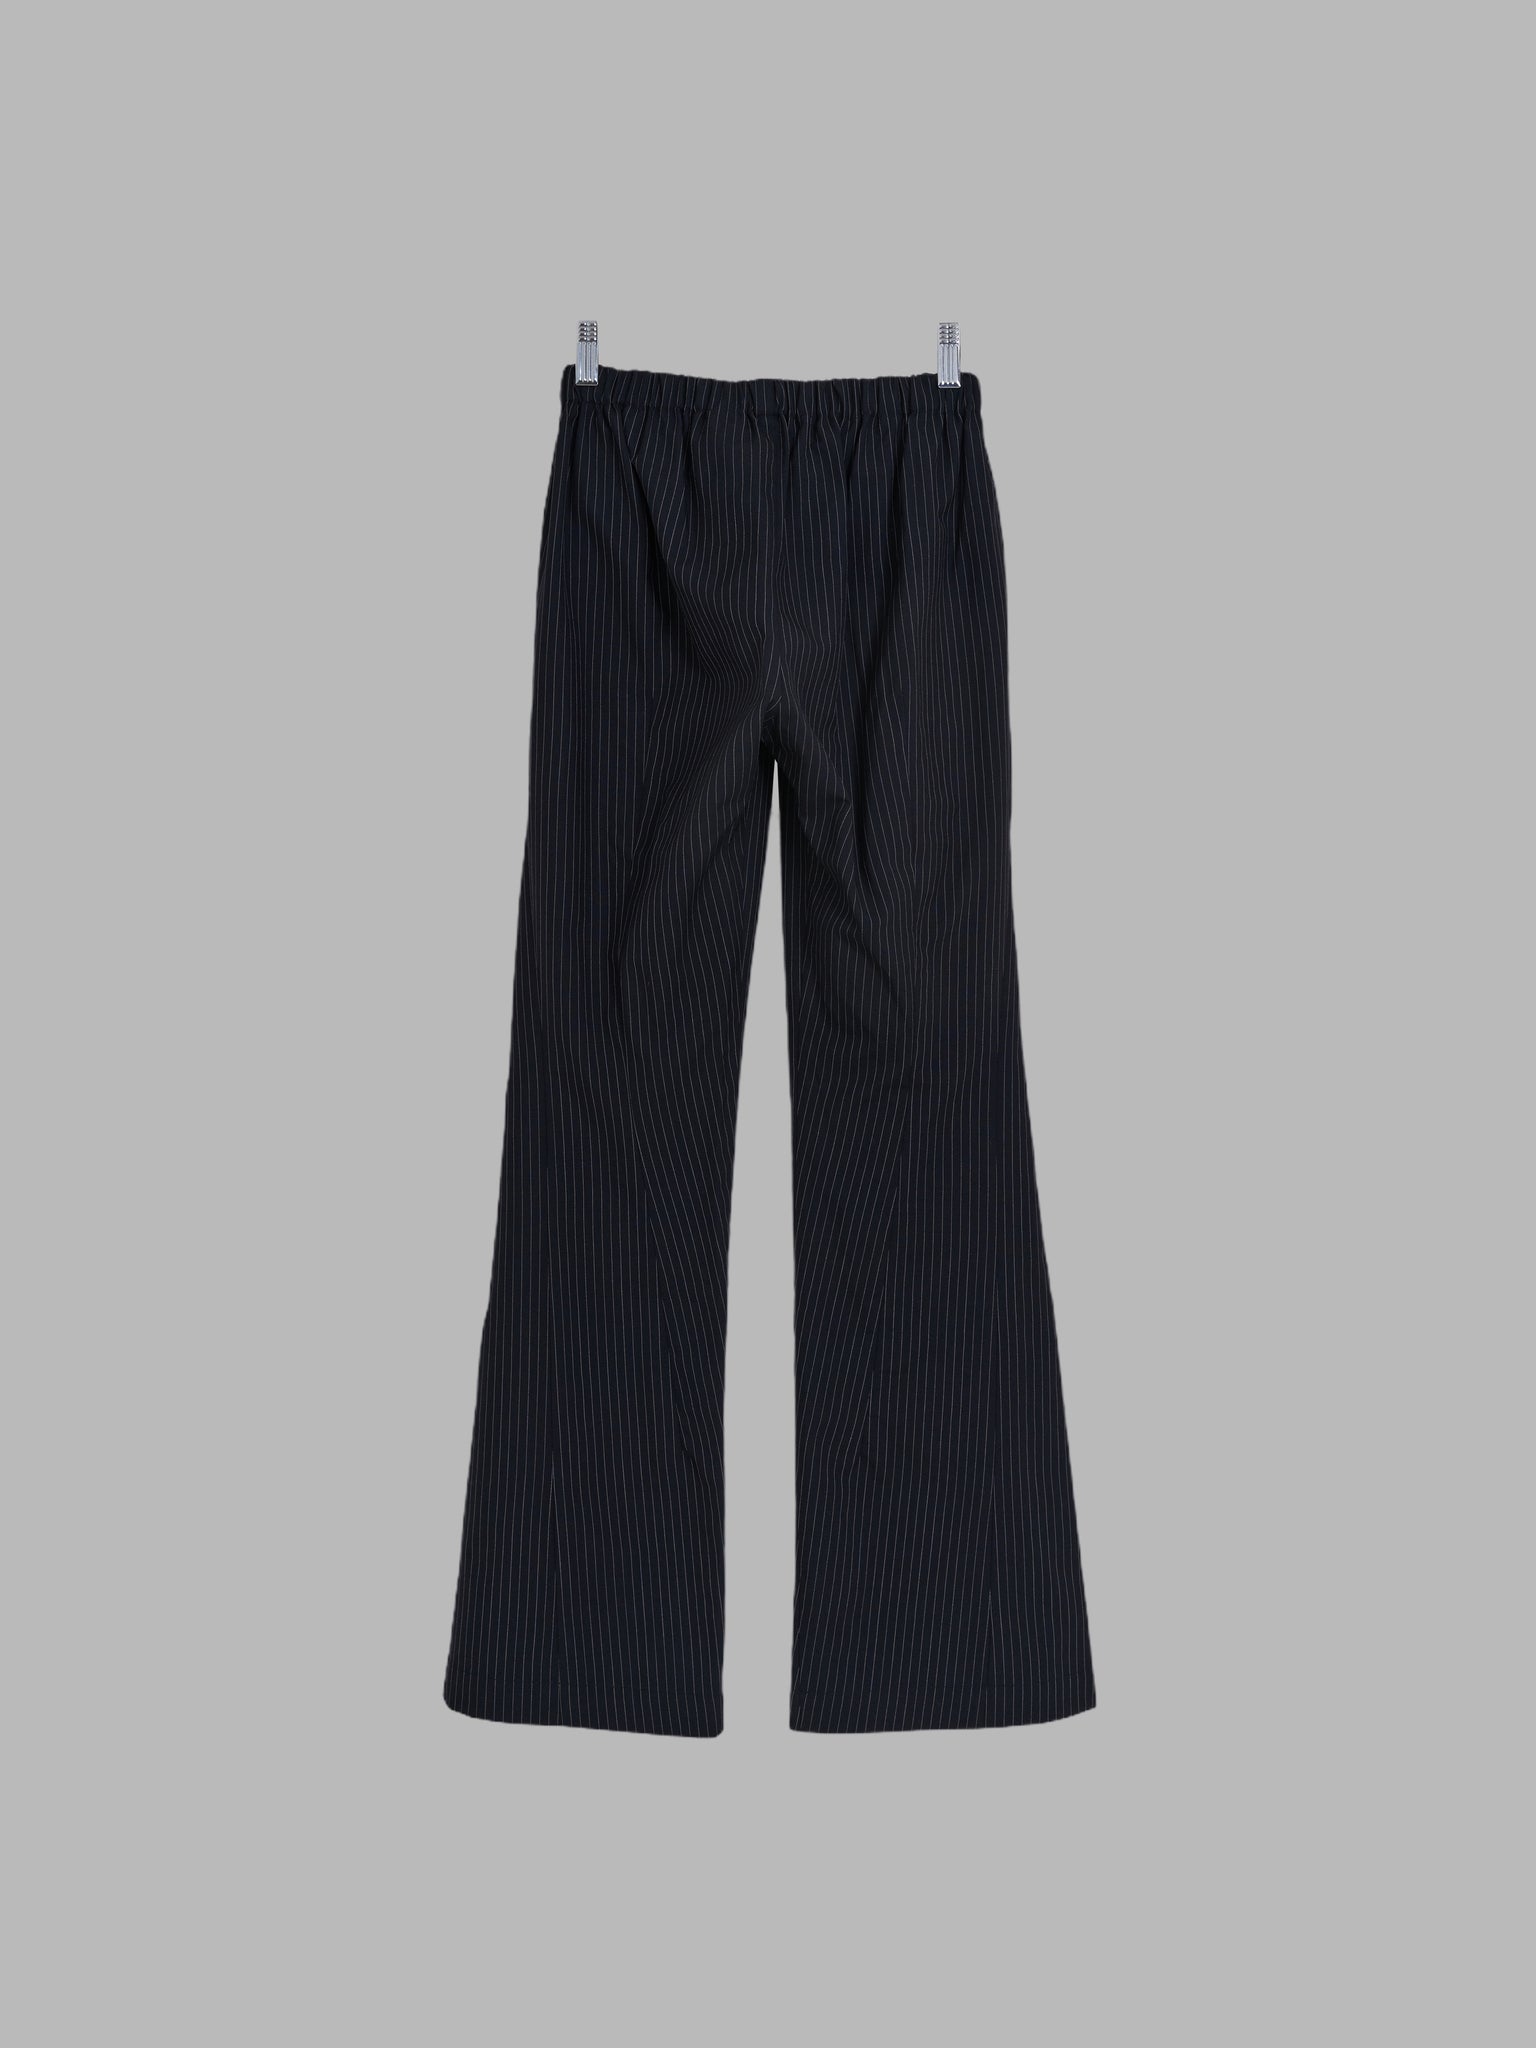 Junya Watanabe Comme des Garcons 1996 striped wool elastic waist flared trousers